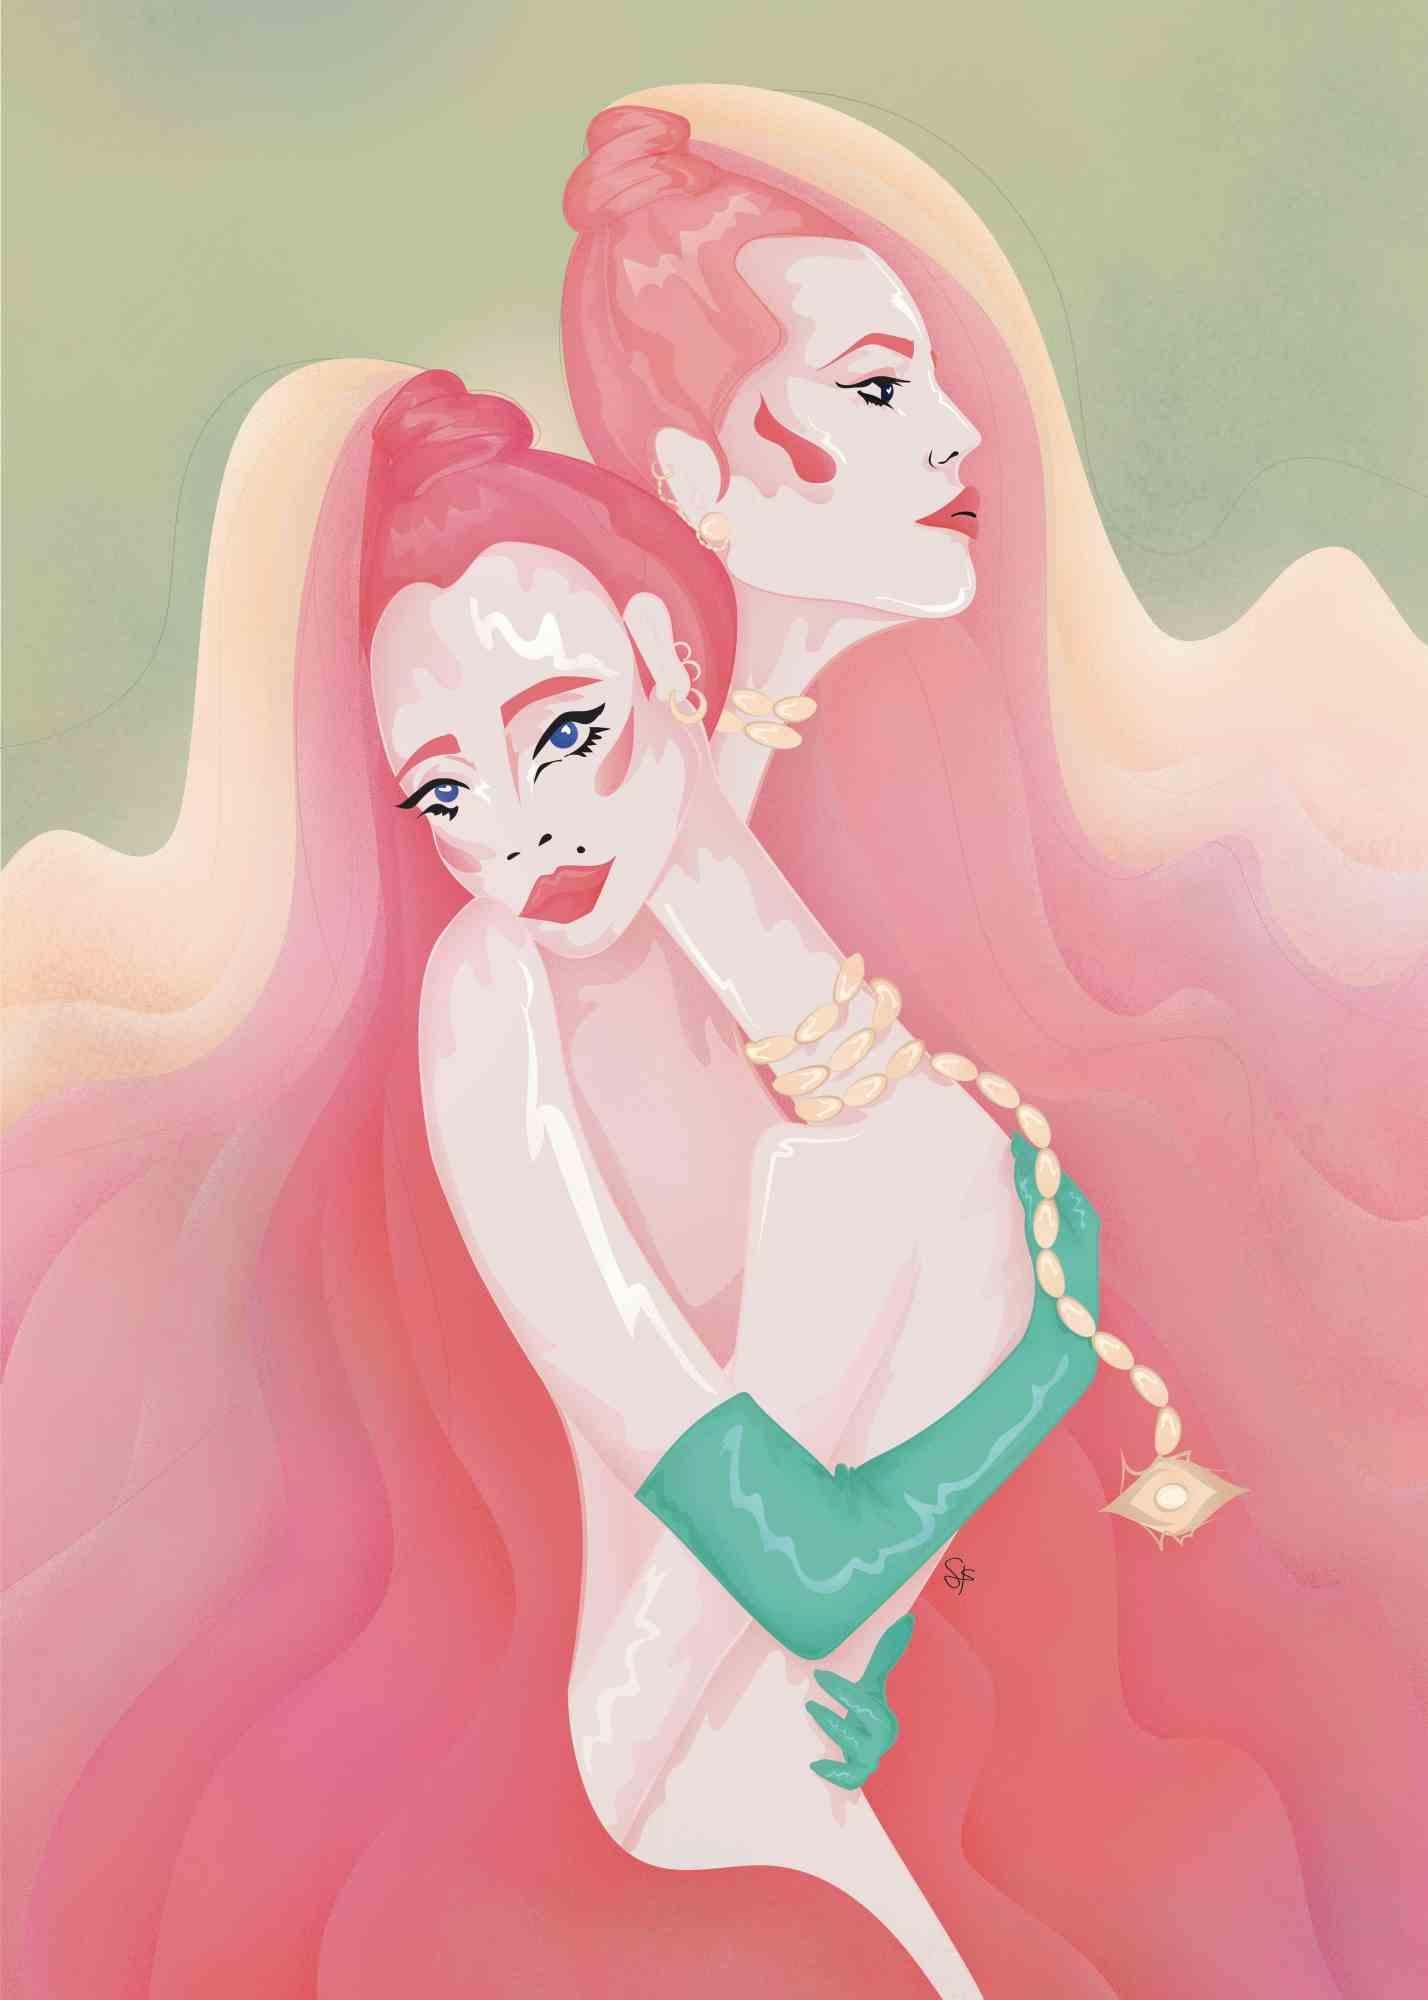 Embrace Me is a beautiful illustration on paper (giclée print) realized by the Italian artist Sara Franzese in 2022.

Edition of 5. Hand-signed and numbered. 

Two sisters, one protects the other in an embrace that becomes an explosion of colors.